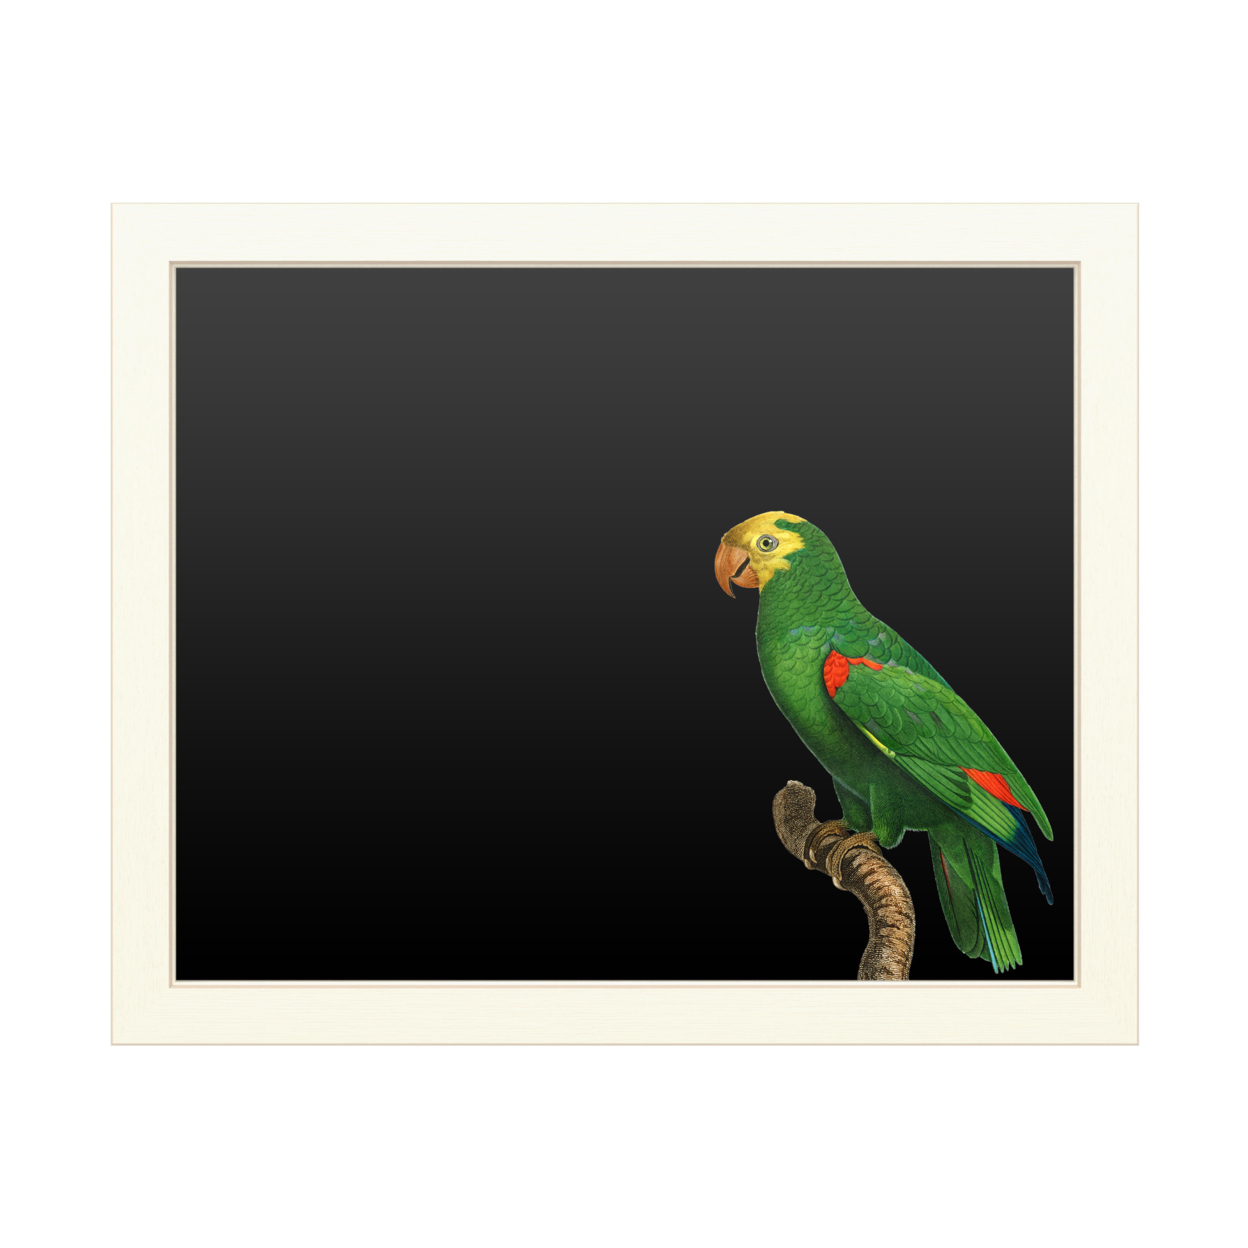 16 X 20 Chalk Board With Printed Artwork - Barraband Parrot Of The Tropics Iii White Board - Ready To Hang Chalkboard